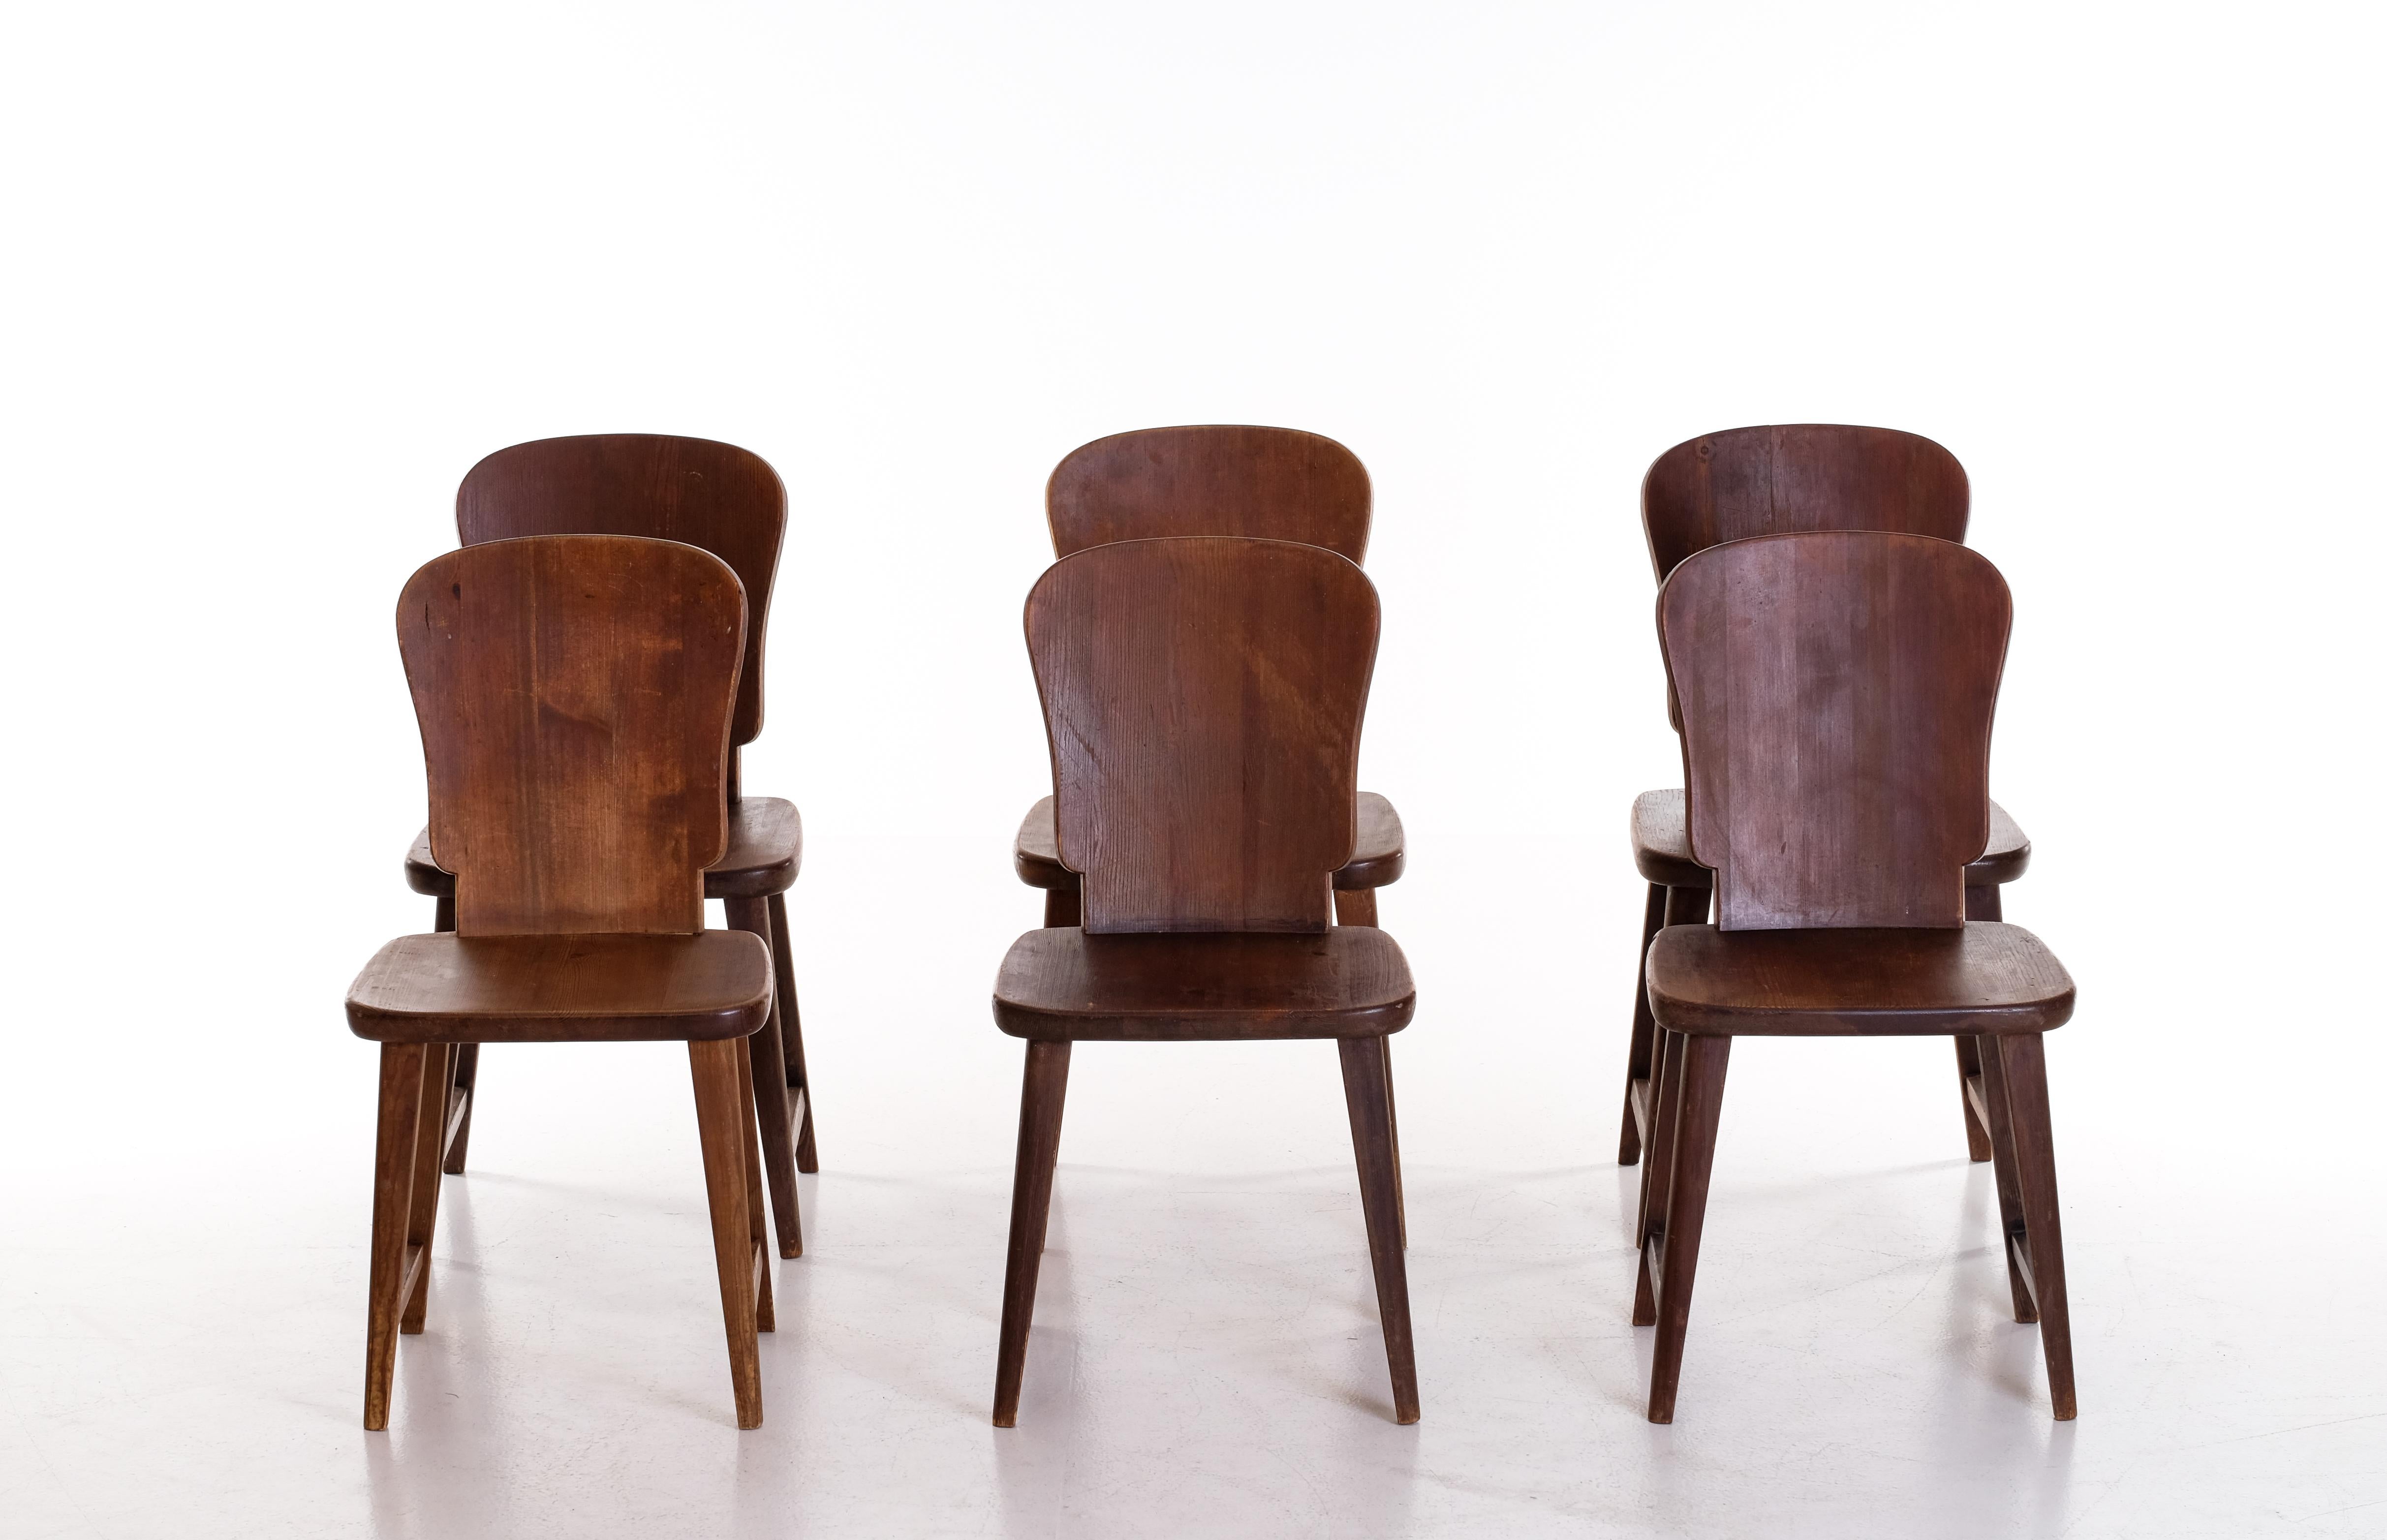 1940s wooden chairs